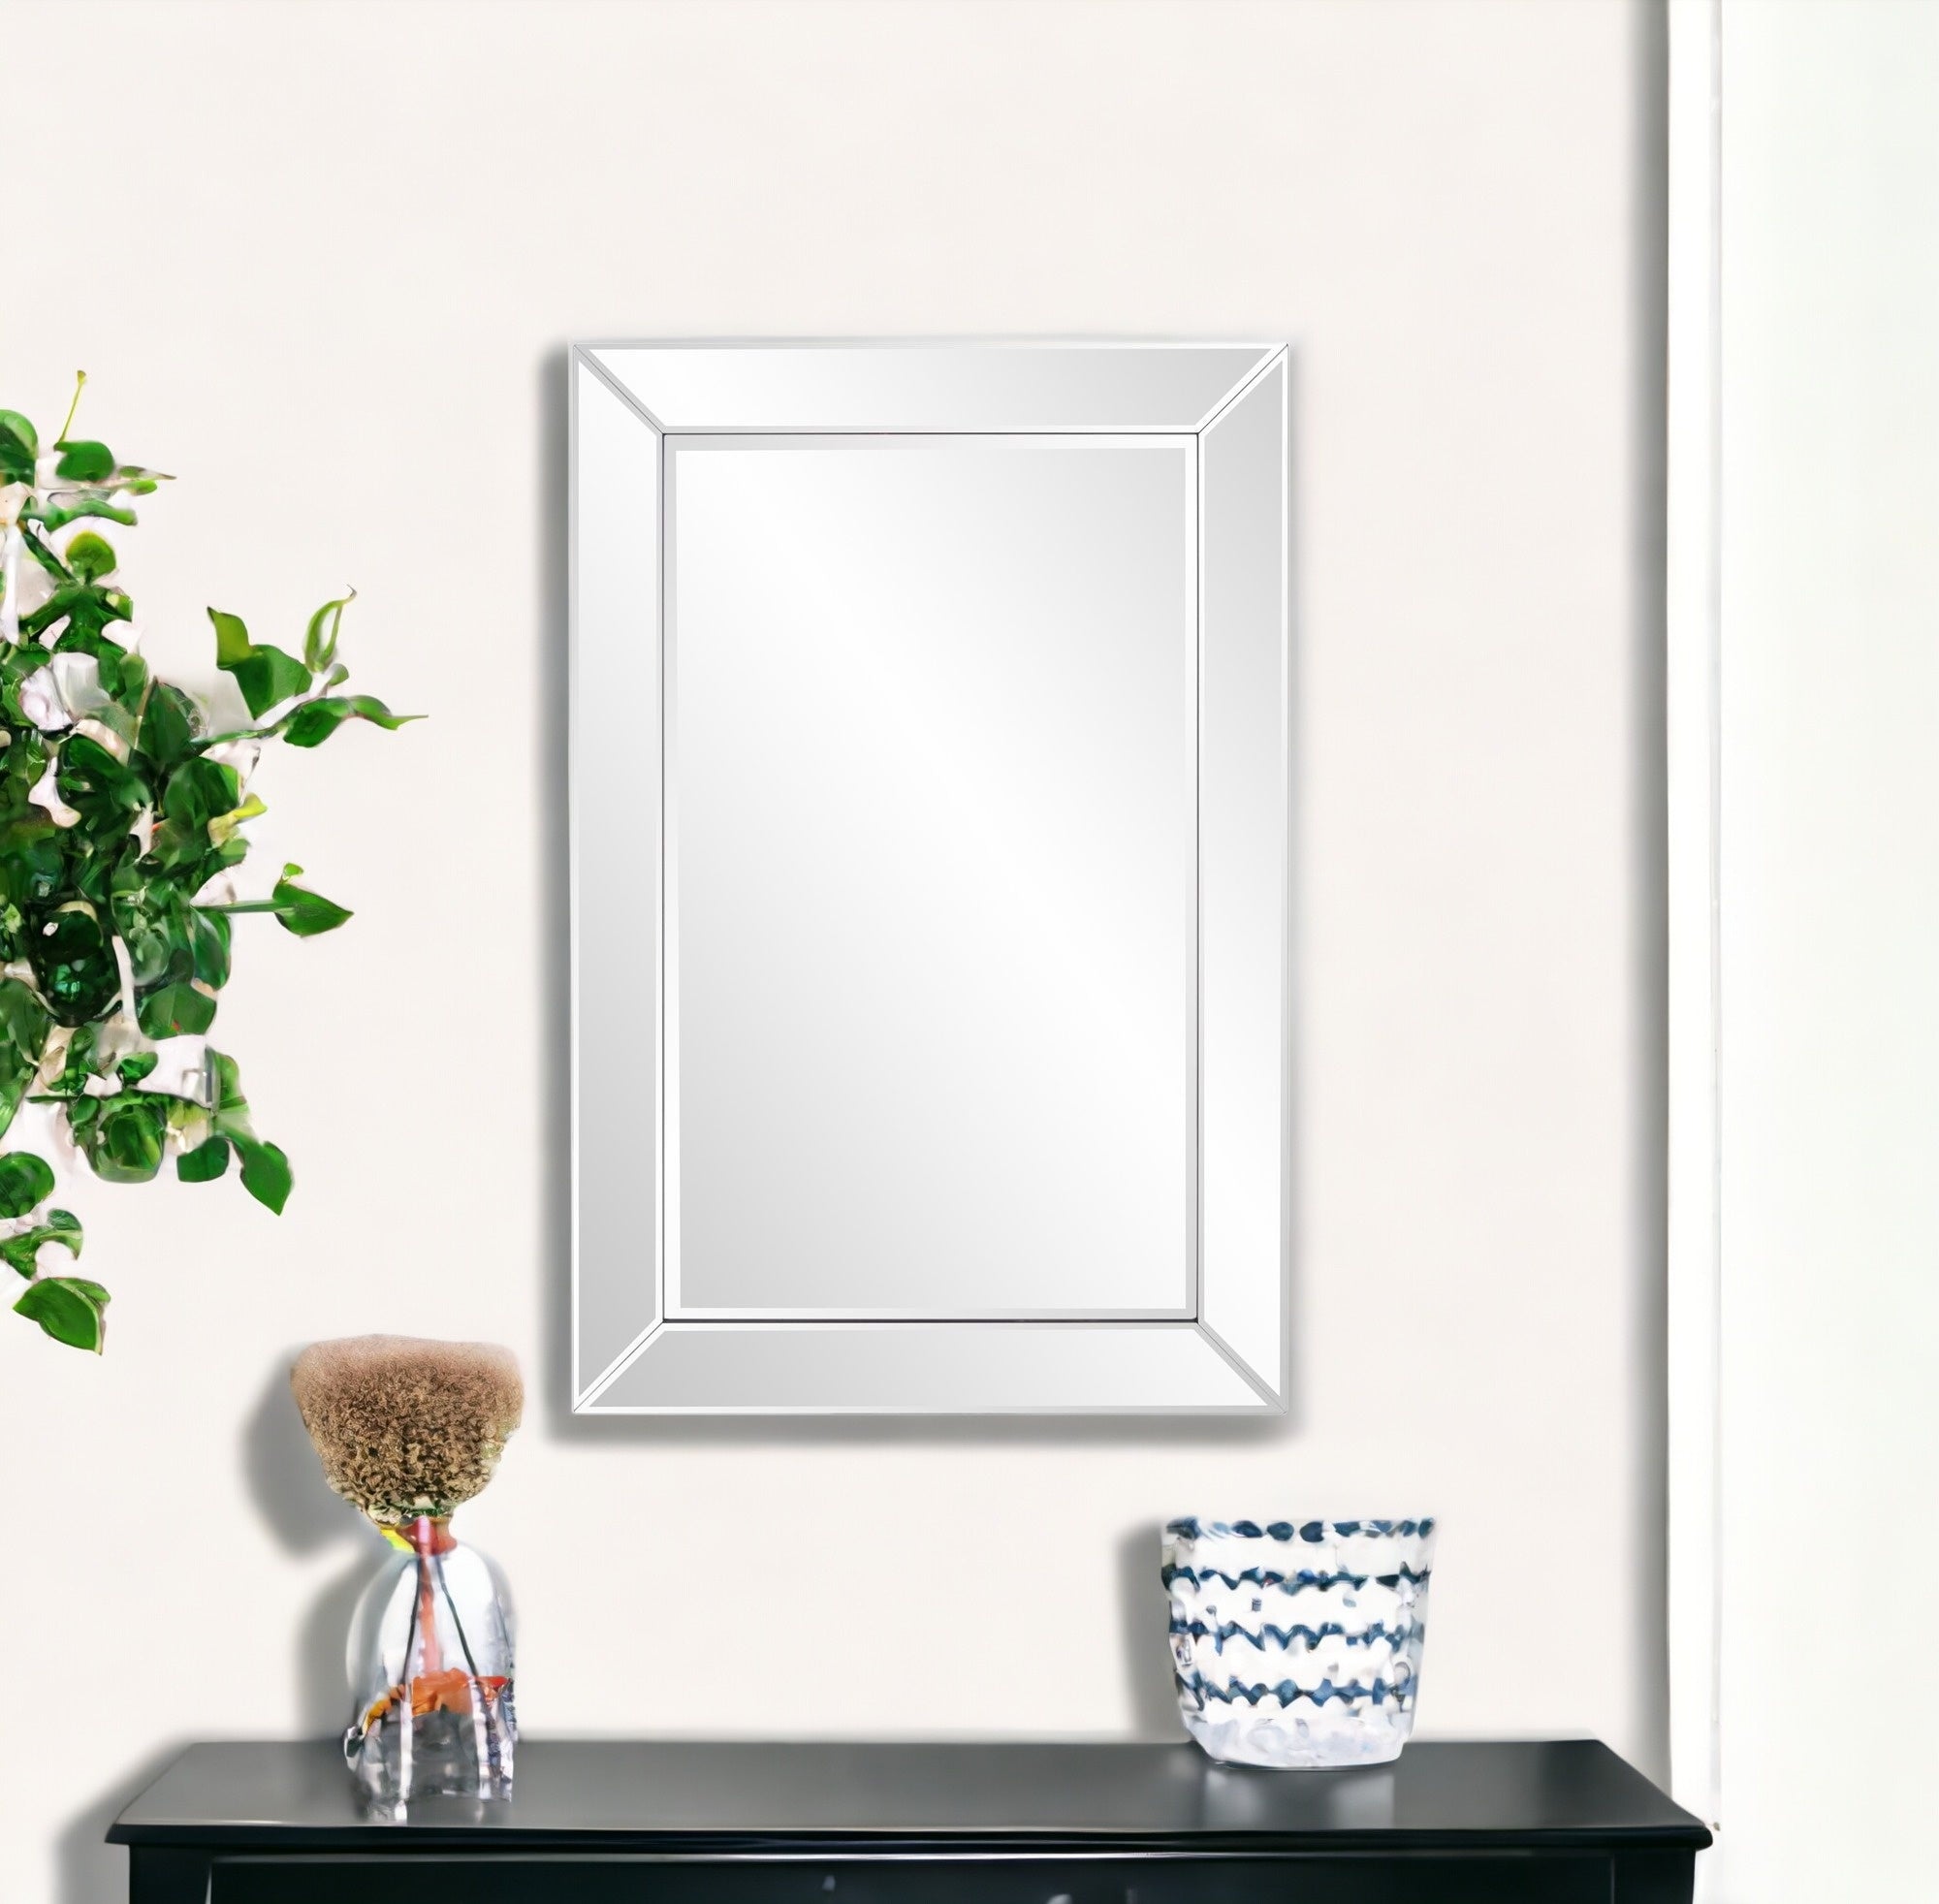 36" x 24" Mirrored Frame Hanging Accent Mirror